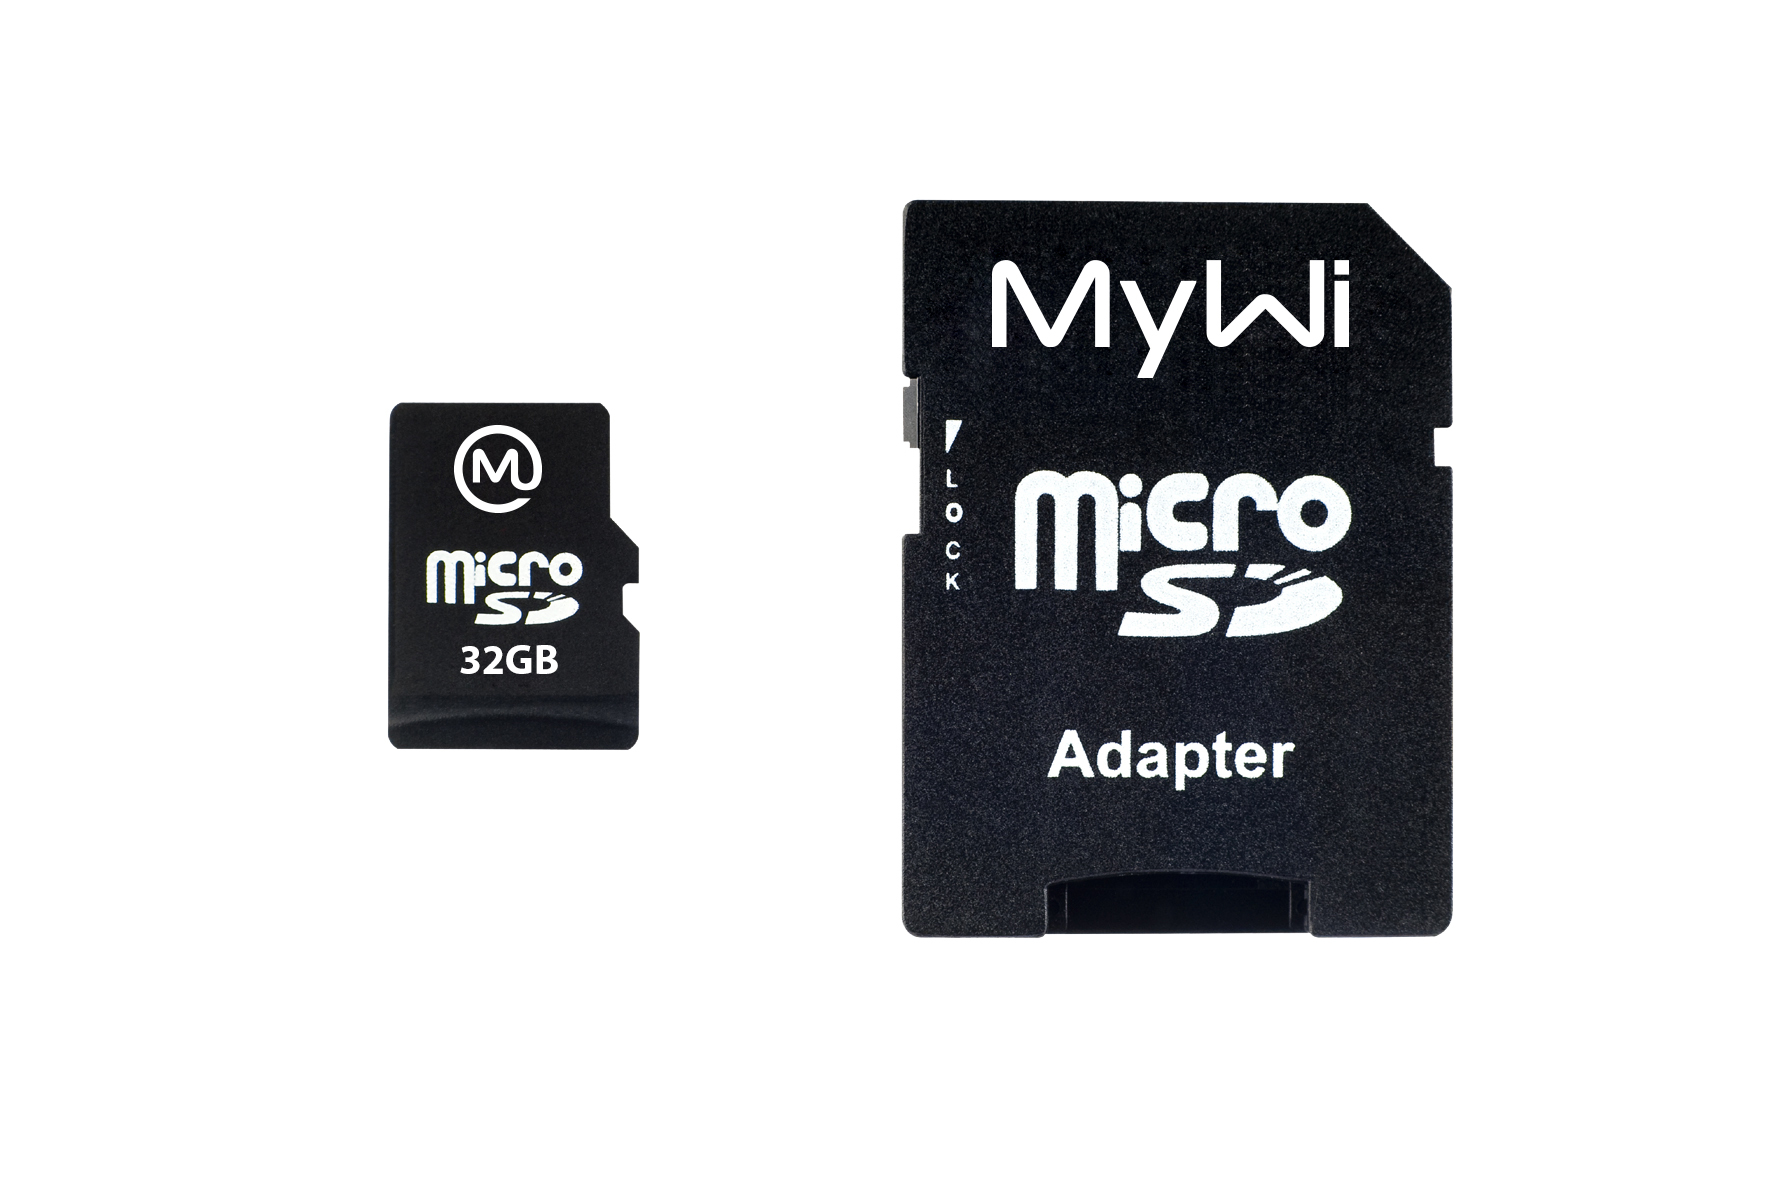 https://www.reference-gaming.com/assets/media/product/14111/carte-micro-sd-32-go-adaptateur-sd-mywi.jpg?format=product-cover-large&k=1454005682